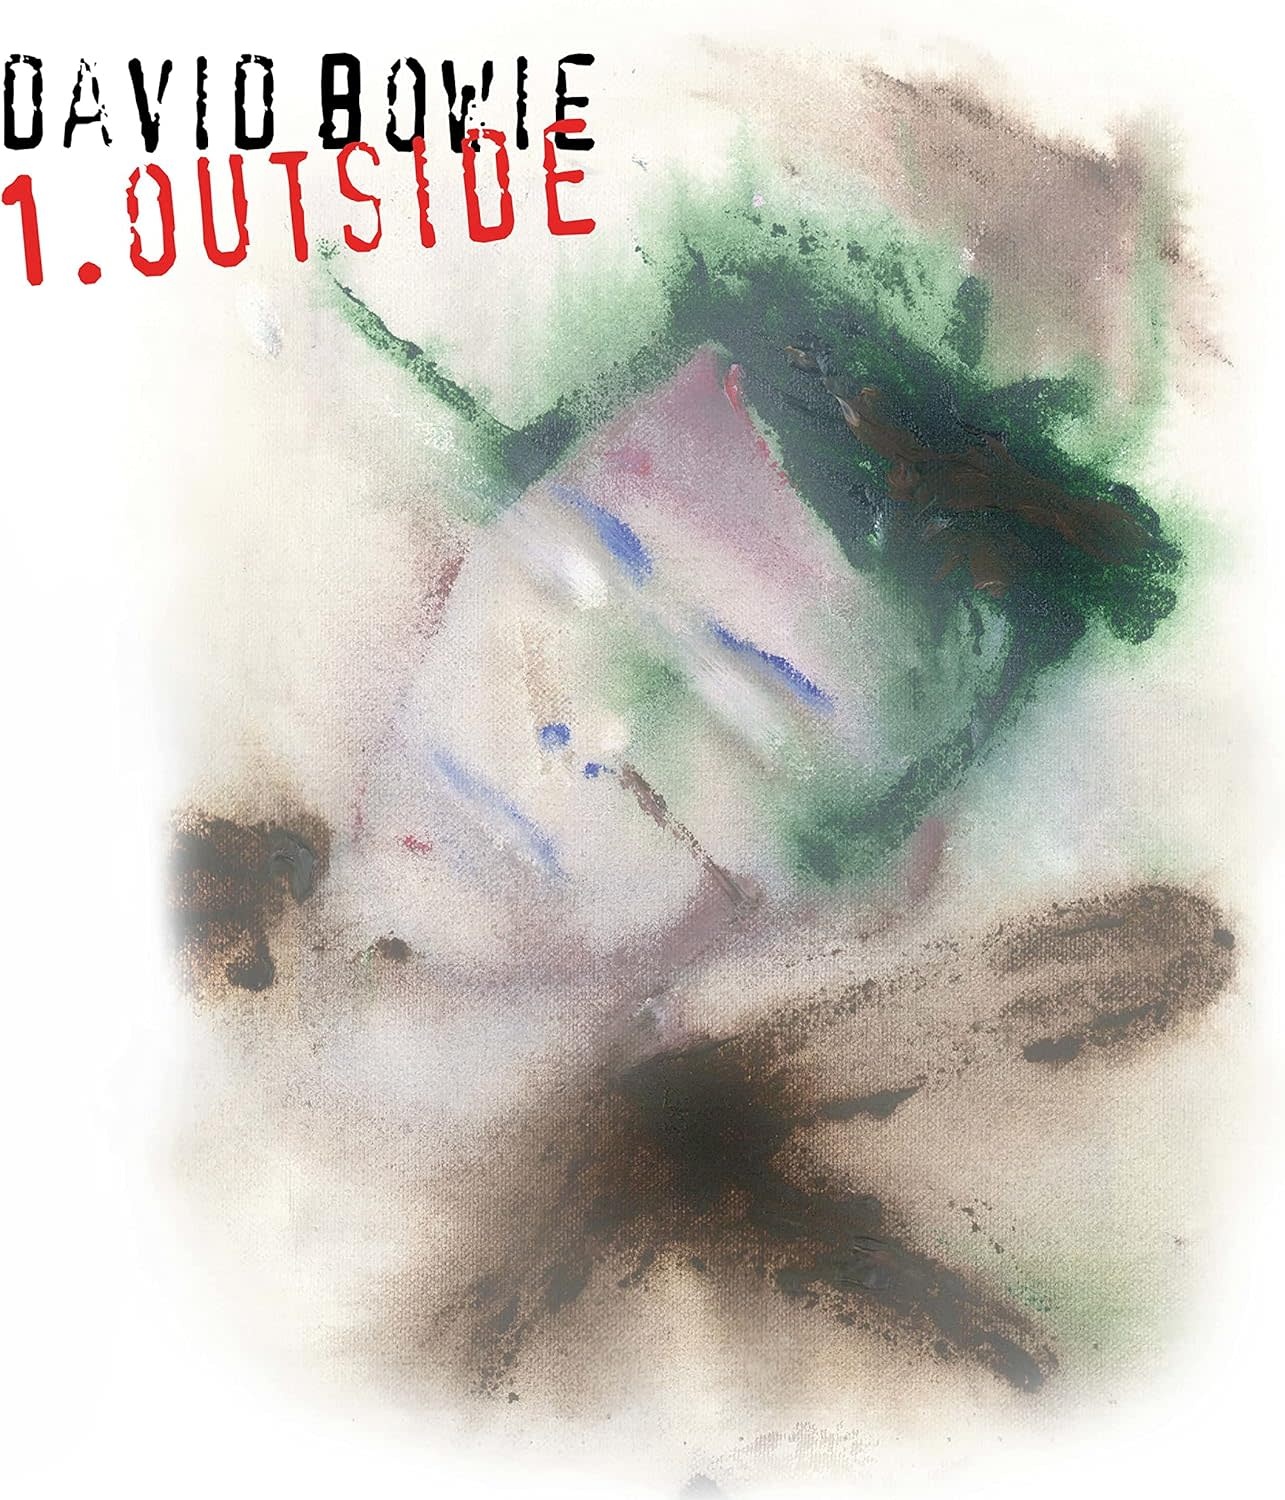 Rock/Pop David Bowie - 1. Outside (The Nathan Adler Diaries: A Hyper Cycle) (2022 Reissue) (VG+/VG+)